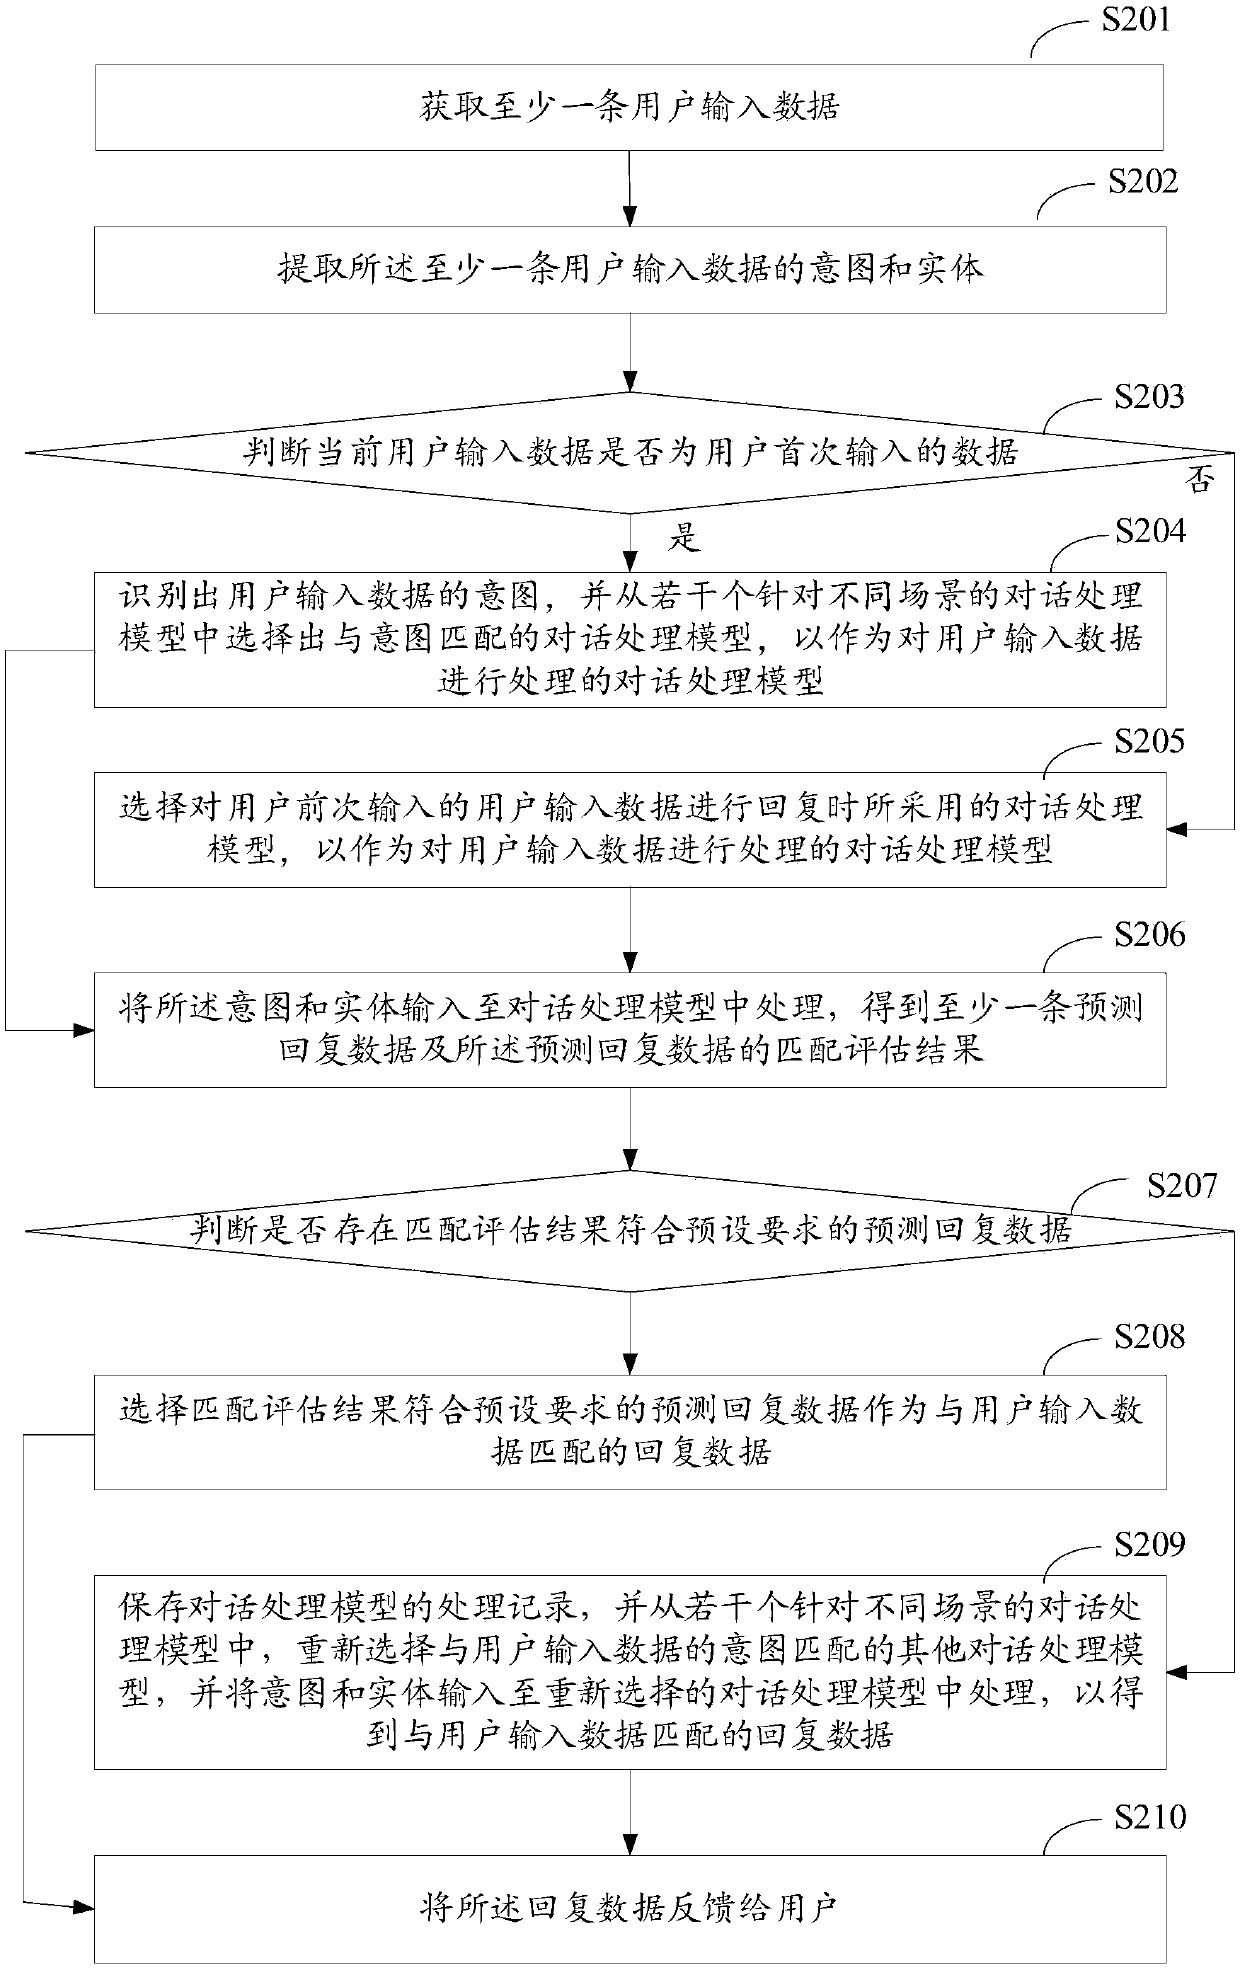 Dialogue processing method, model training method and related equipment thereof